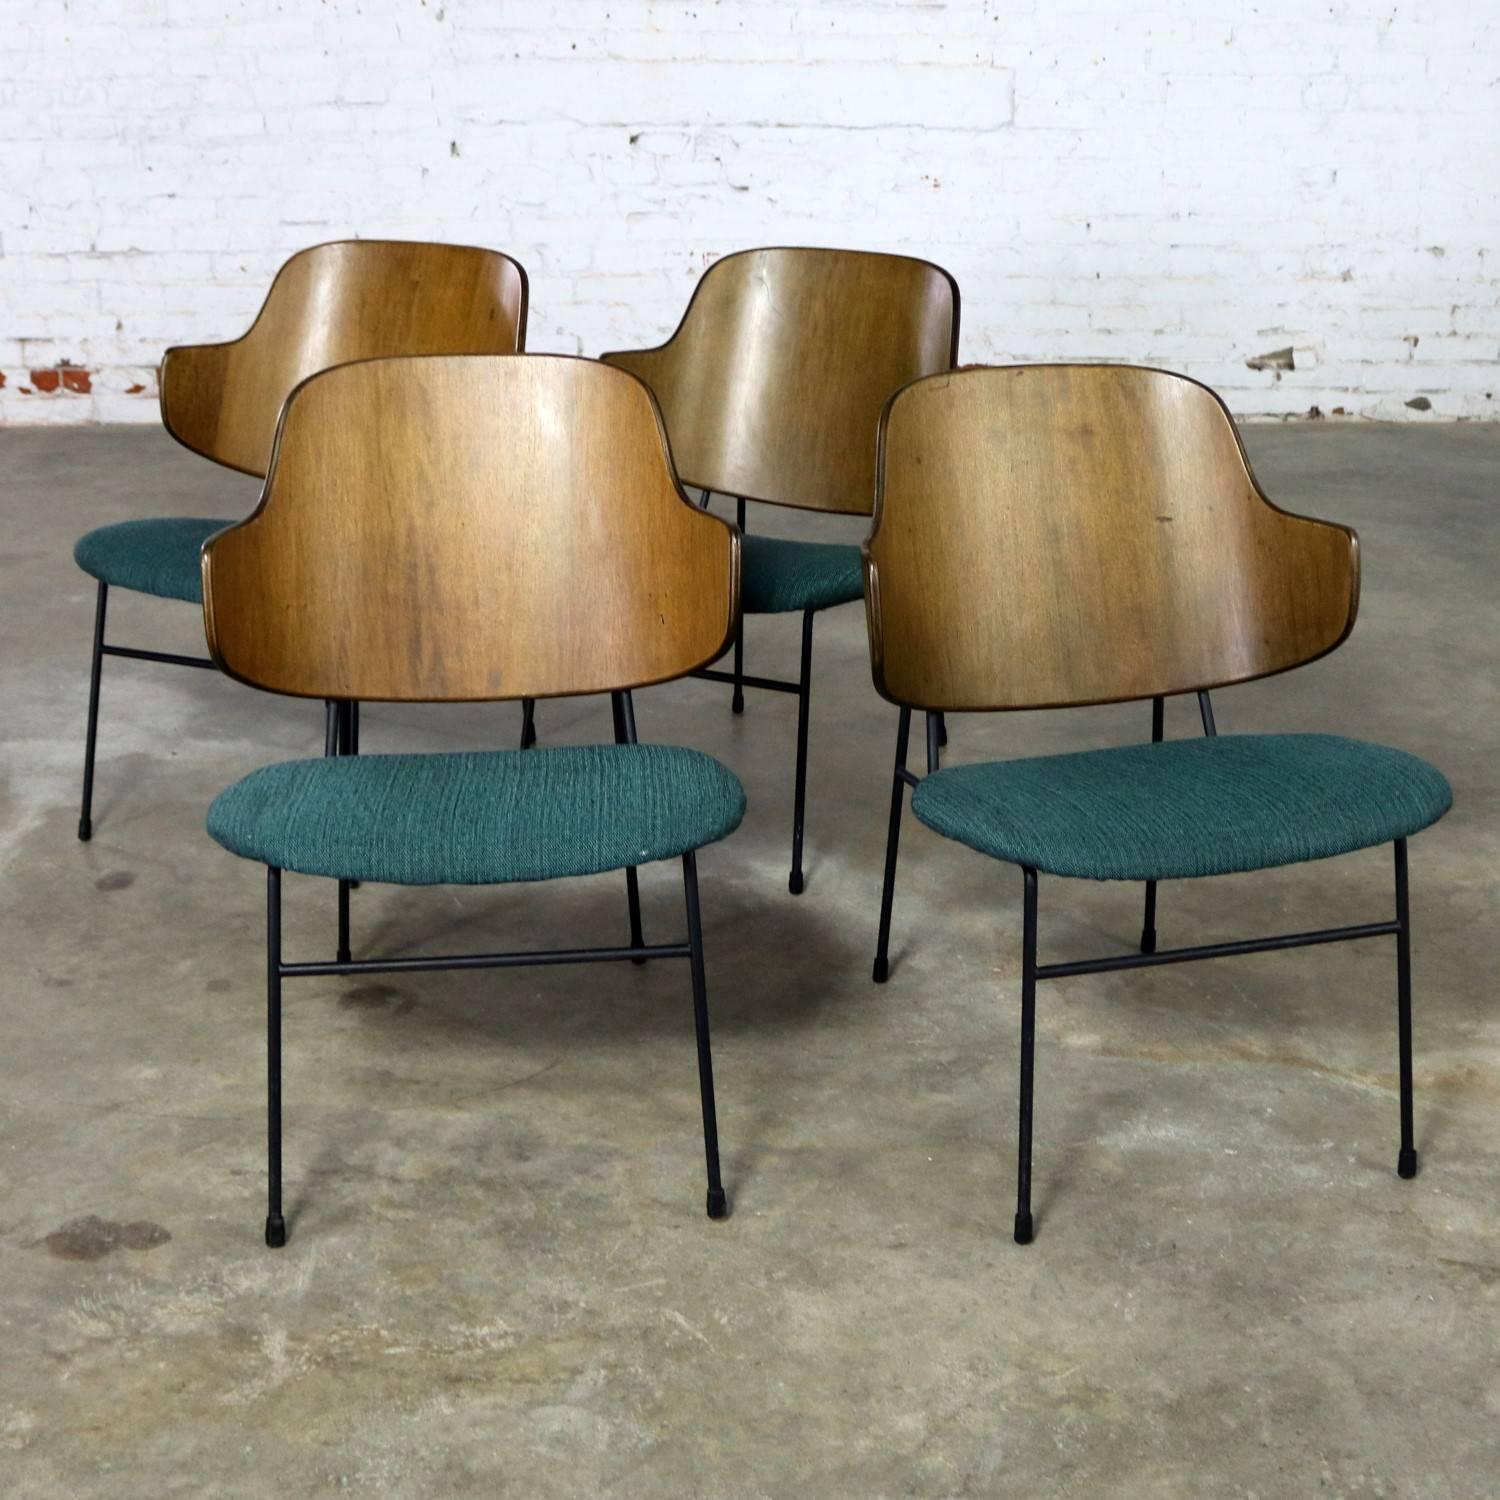 Incredible set of four Scandinavian Mid-Century Modern Ib Kofod-Larsen Penguin chairs. These chairs have a black iron rod frame, walnut molded plywood backs and turquoise tweed upholstered seats. They are in fabulous ready to use condition with new